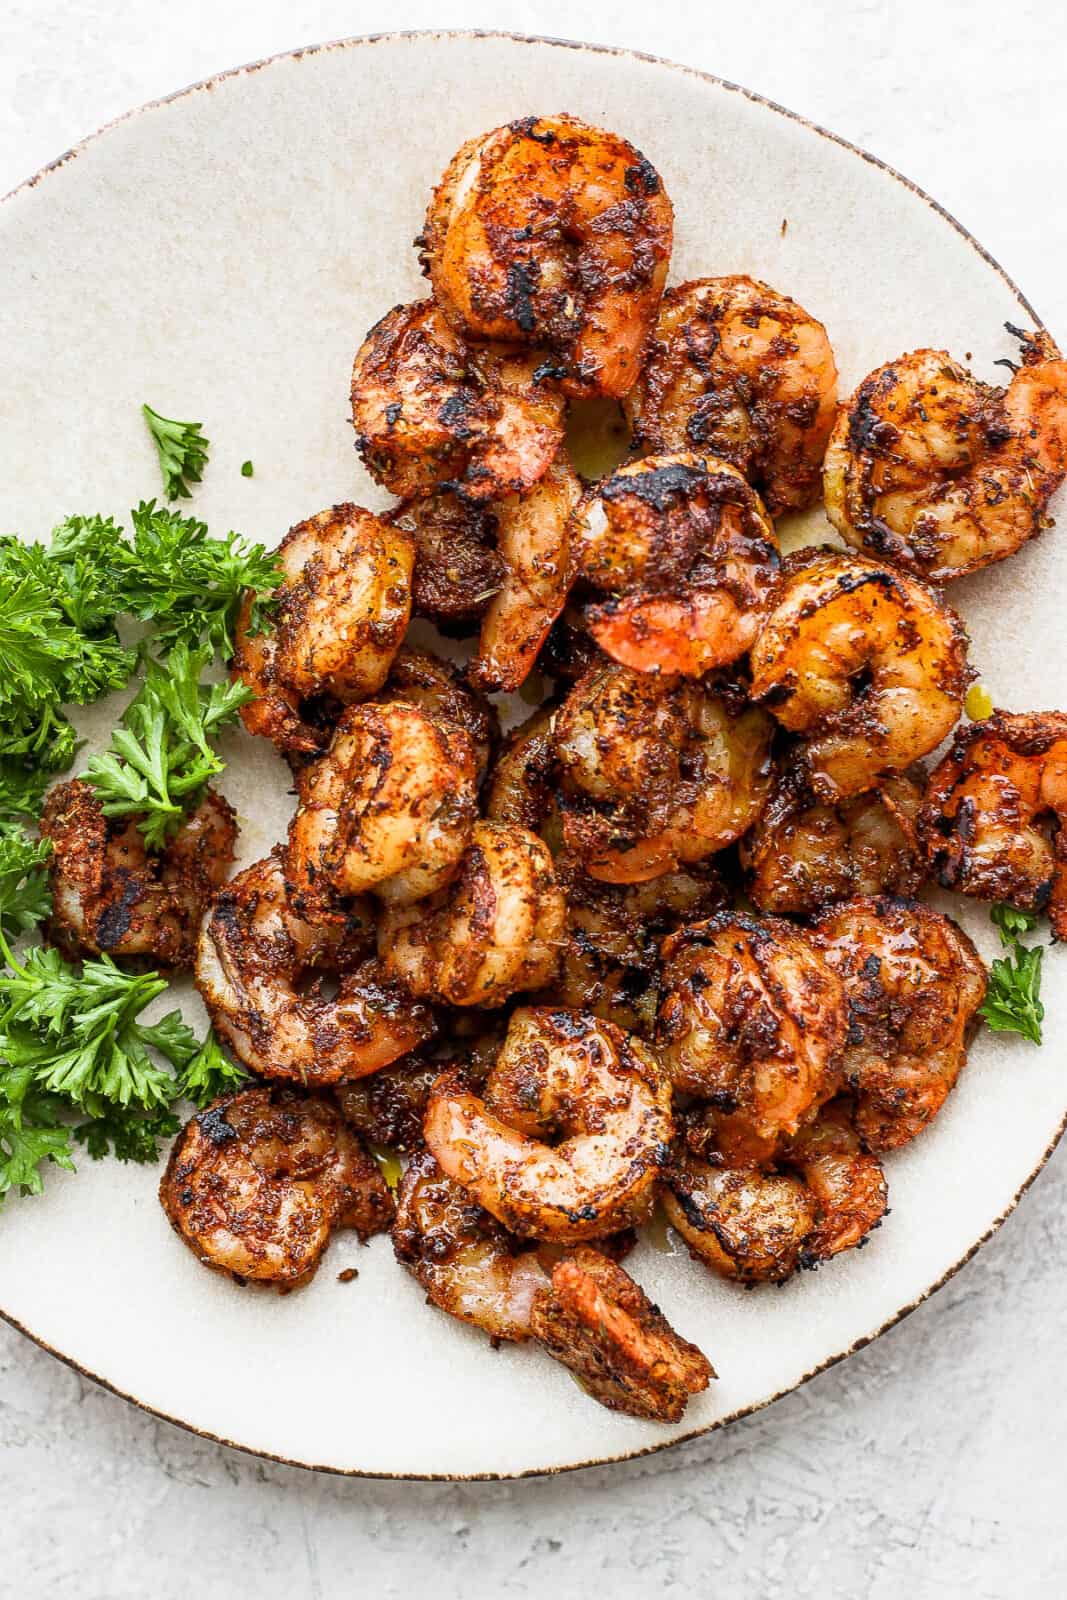 Quick and easy blackened shrimp made in under 10 minutes.